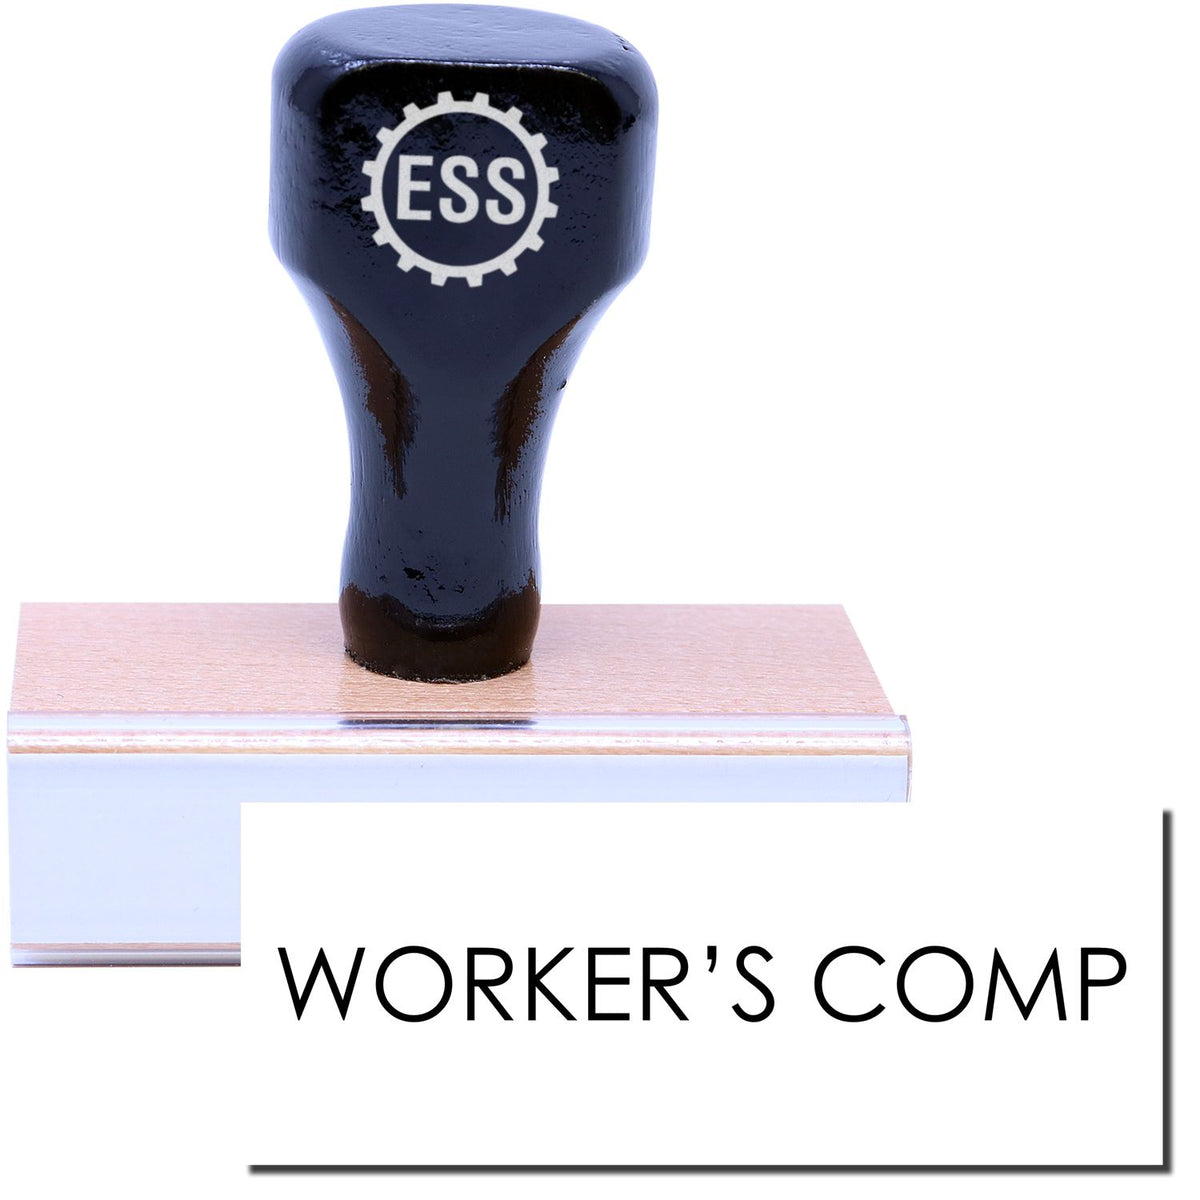 A stock office medical rubber stamp with a stamped image showing how the text &quot;WORKER&#39;S COMP&quot; is displayed after stamping.